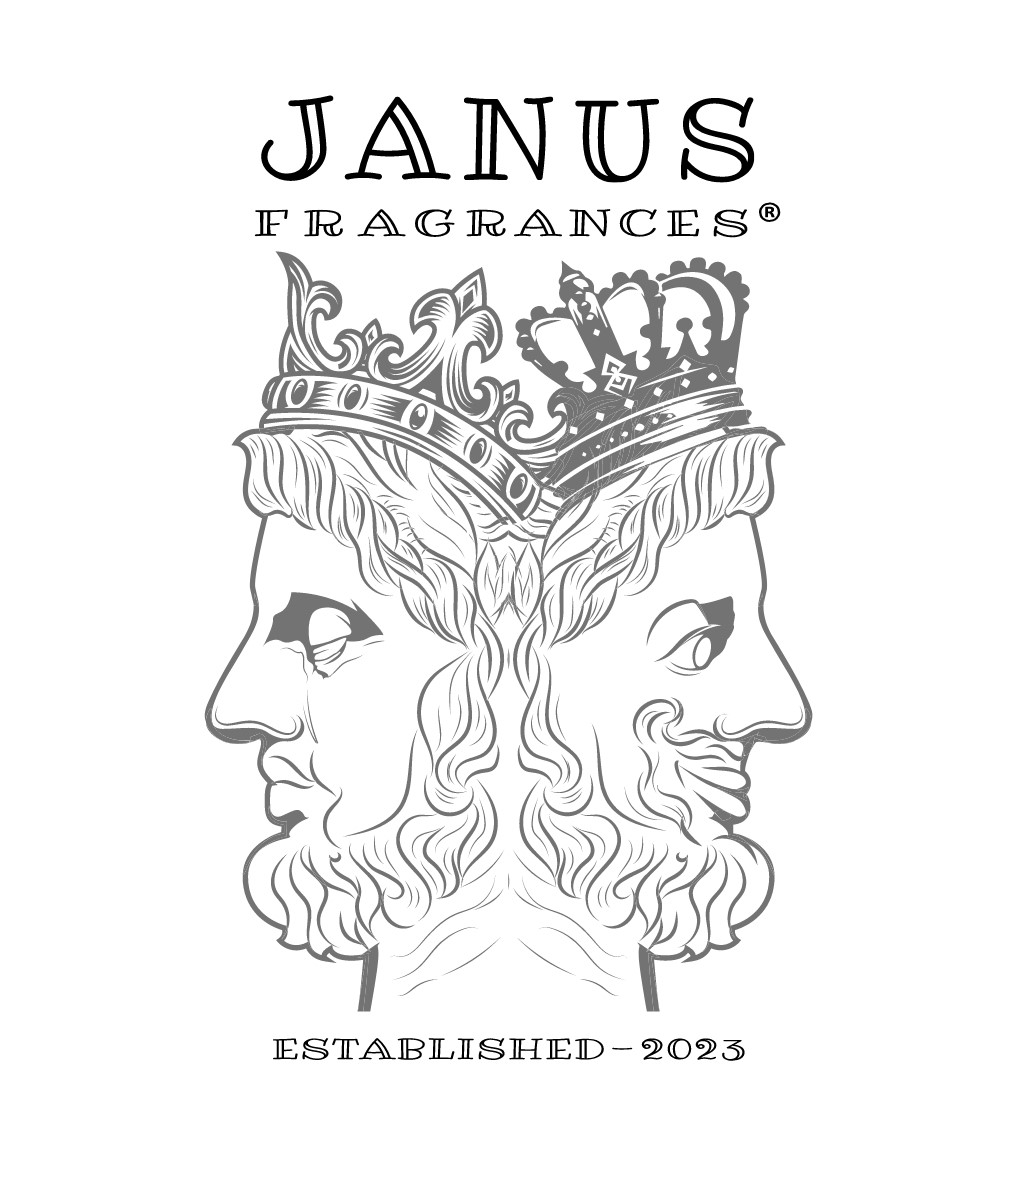 Janus Fragrances Sees Dream Turn to Reality, Brings Affordable Perfume for All